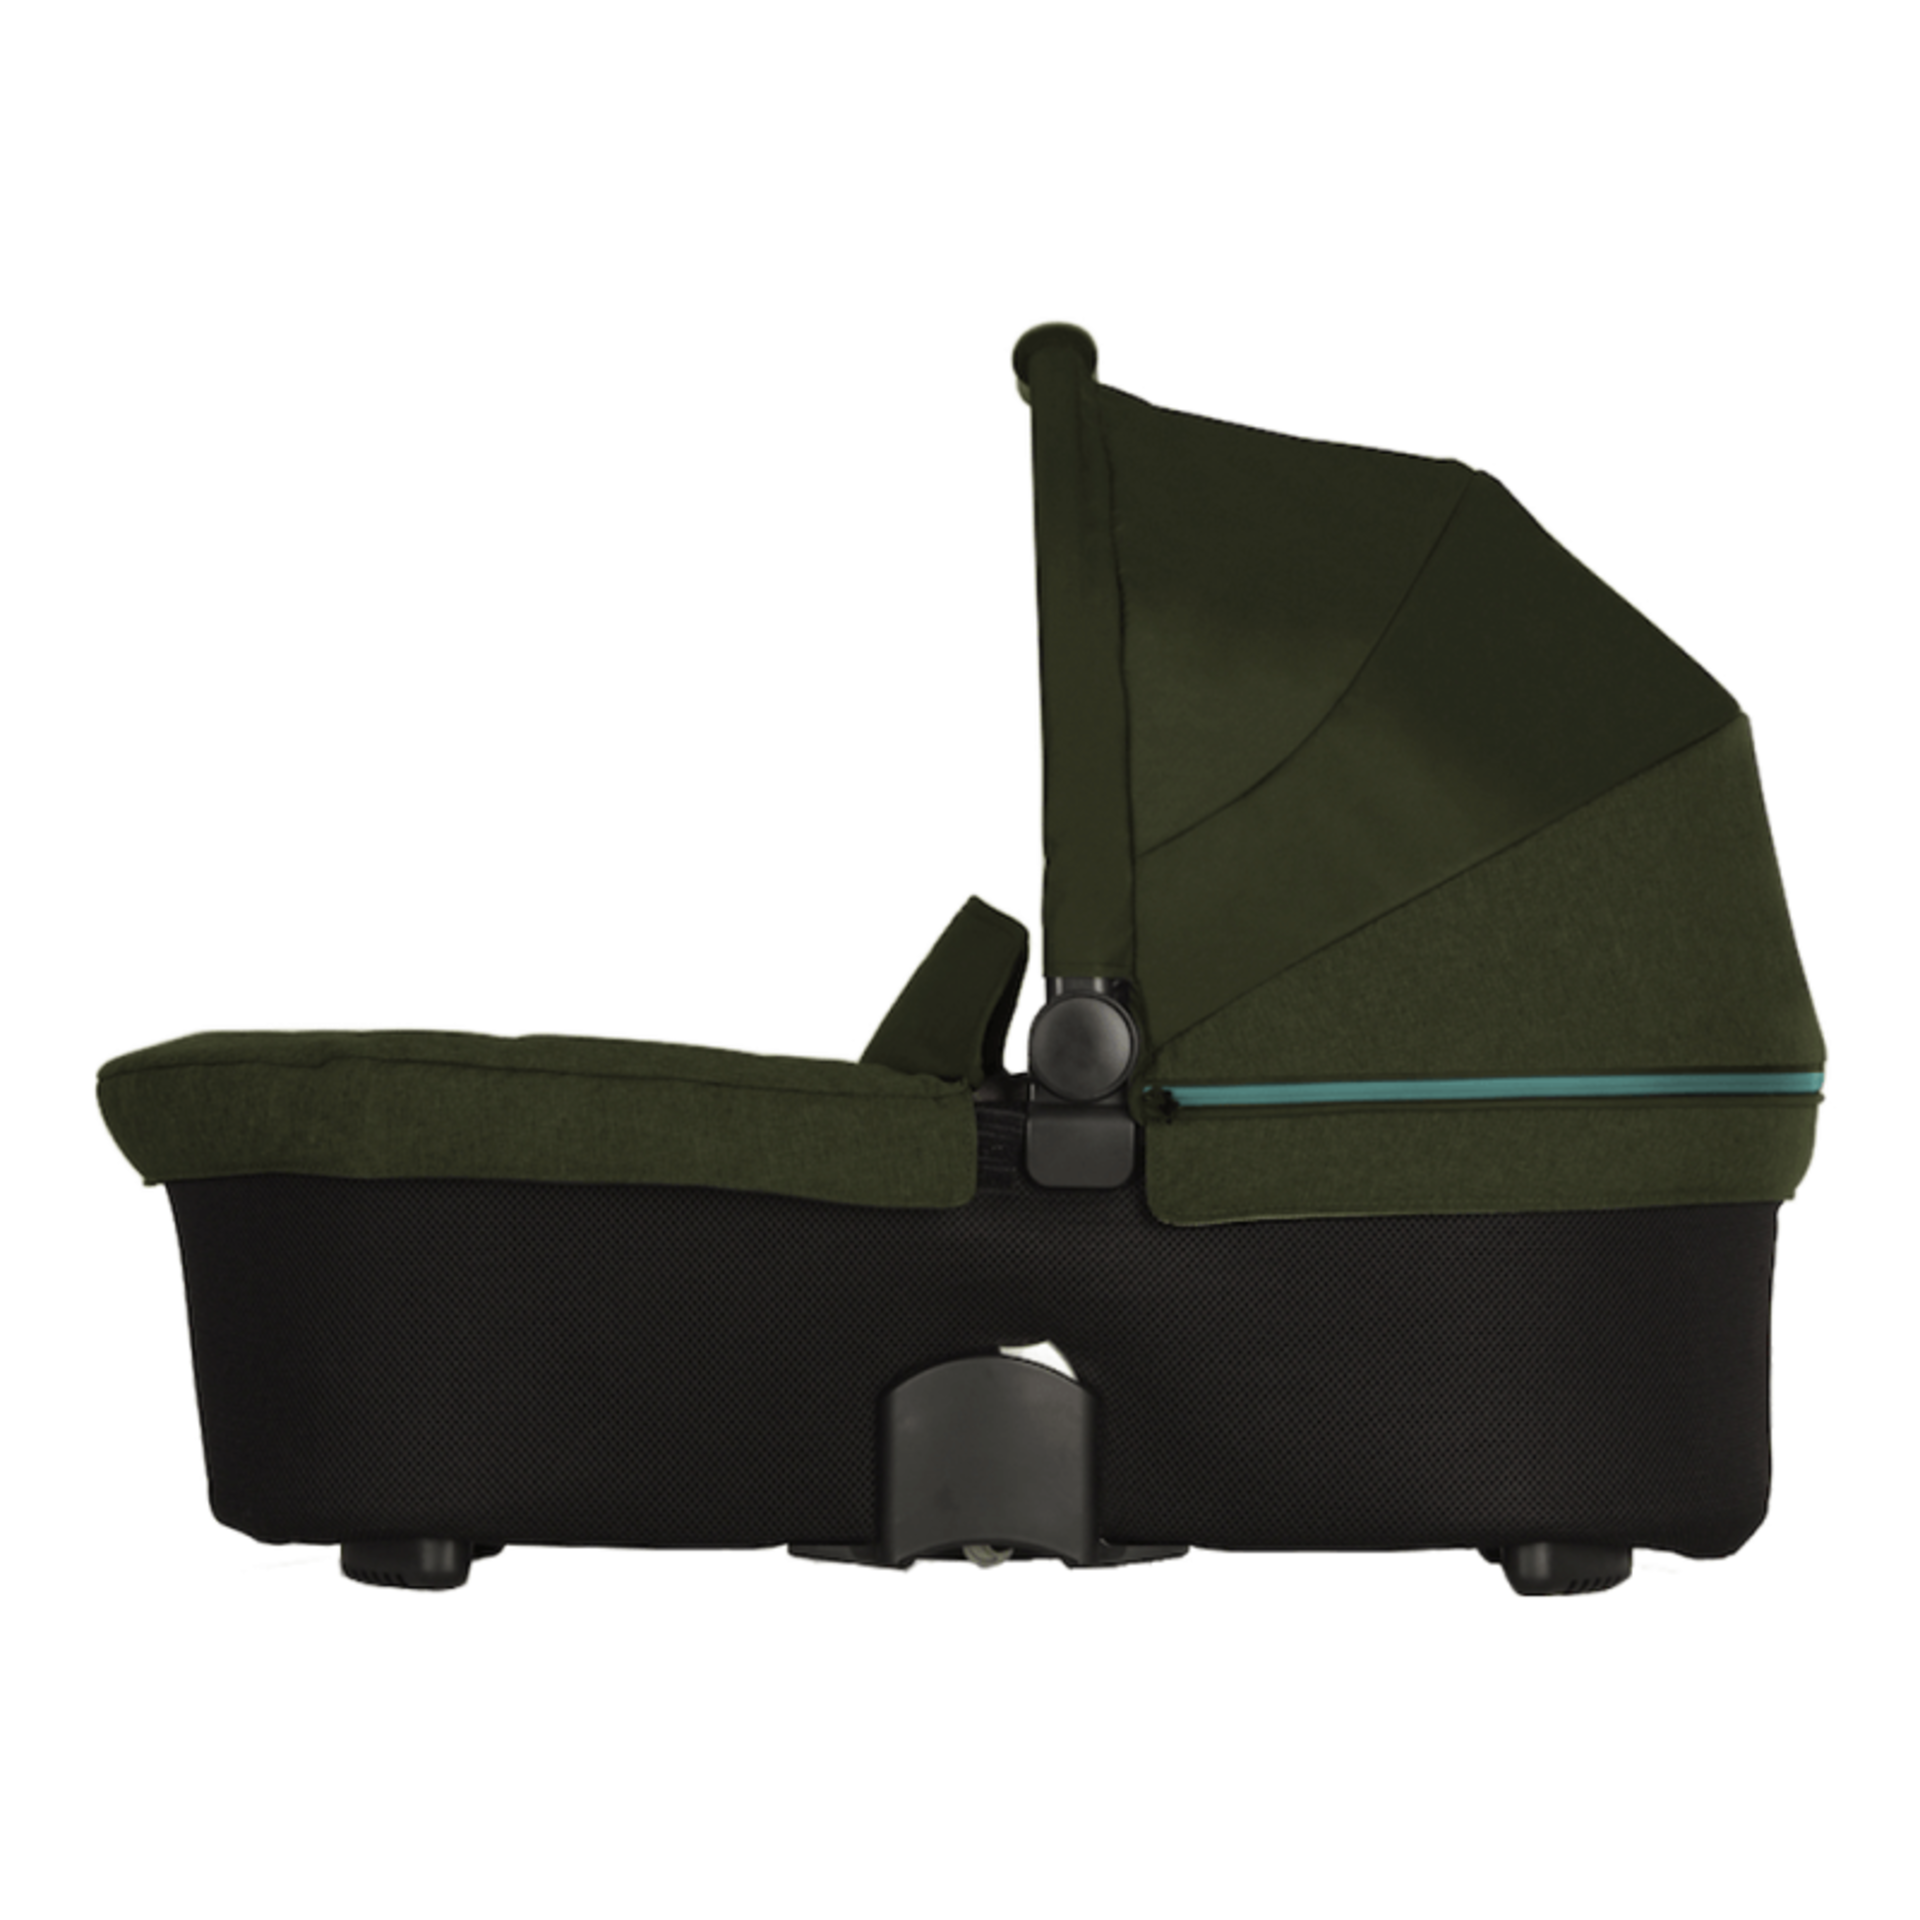 Pallet To Contain 5 x New & Boxed Micralite by Silver Cross Carrycot – Evergreen. RRP £230 each. The